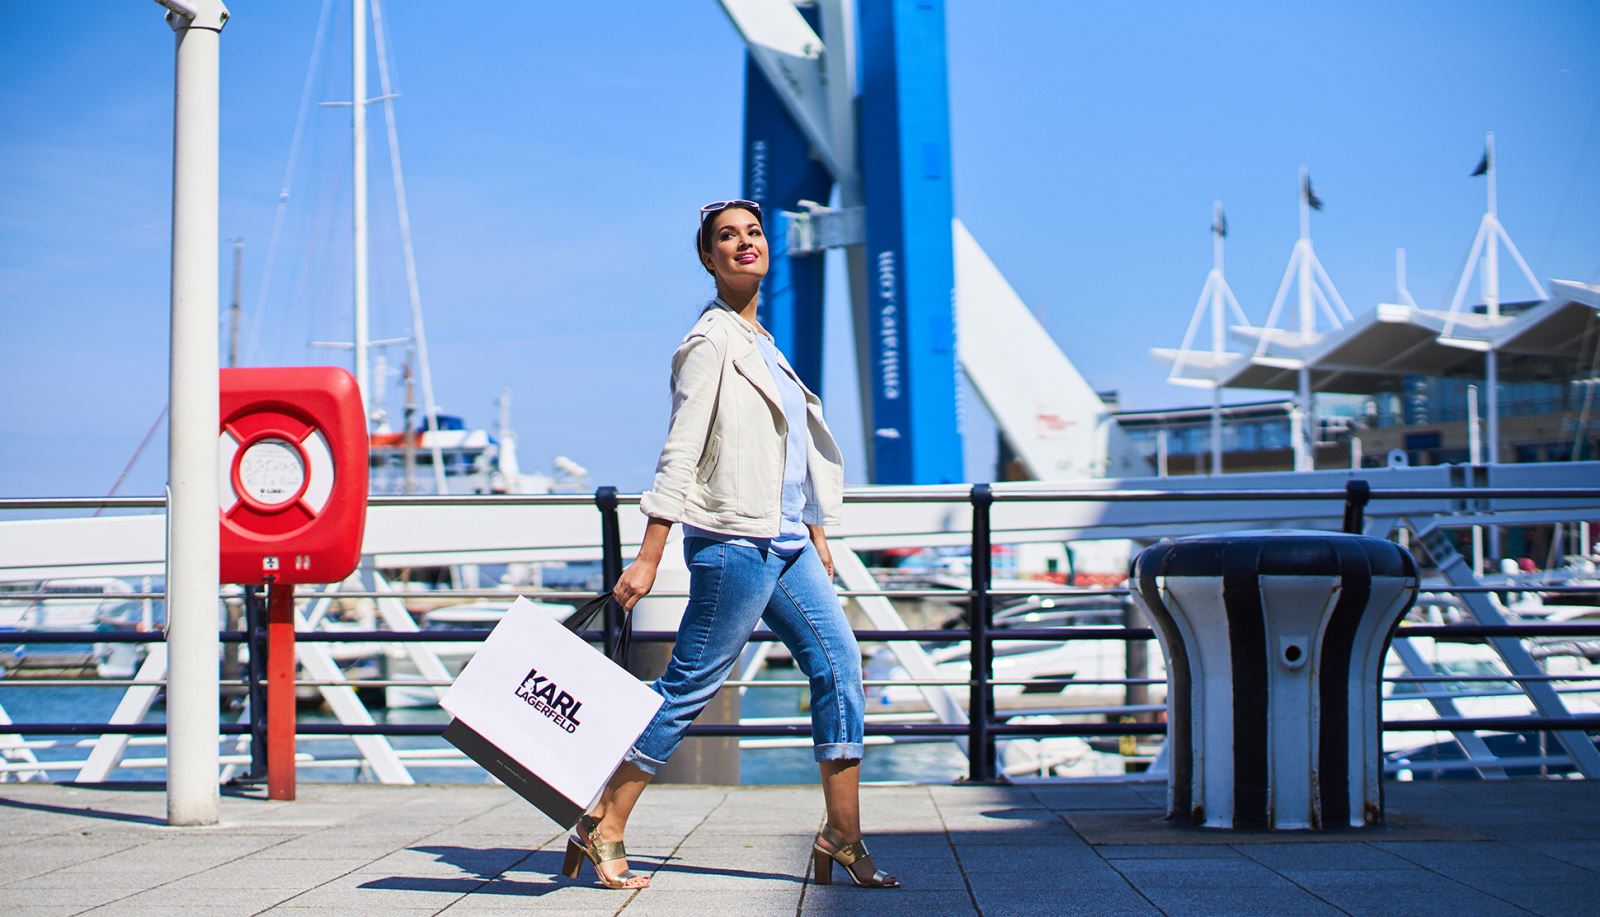 Shopping at Gunwharf Quays in the city of Portsmouth